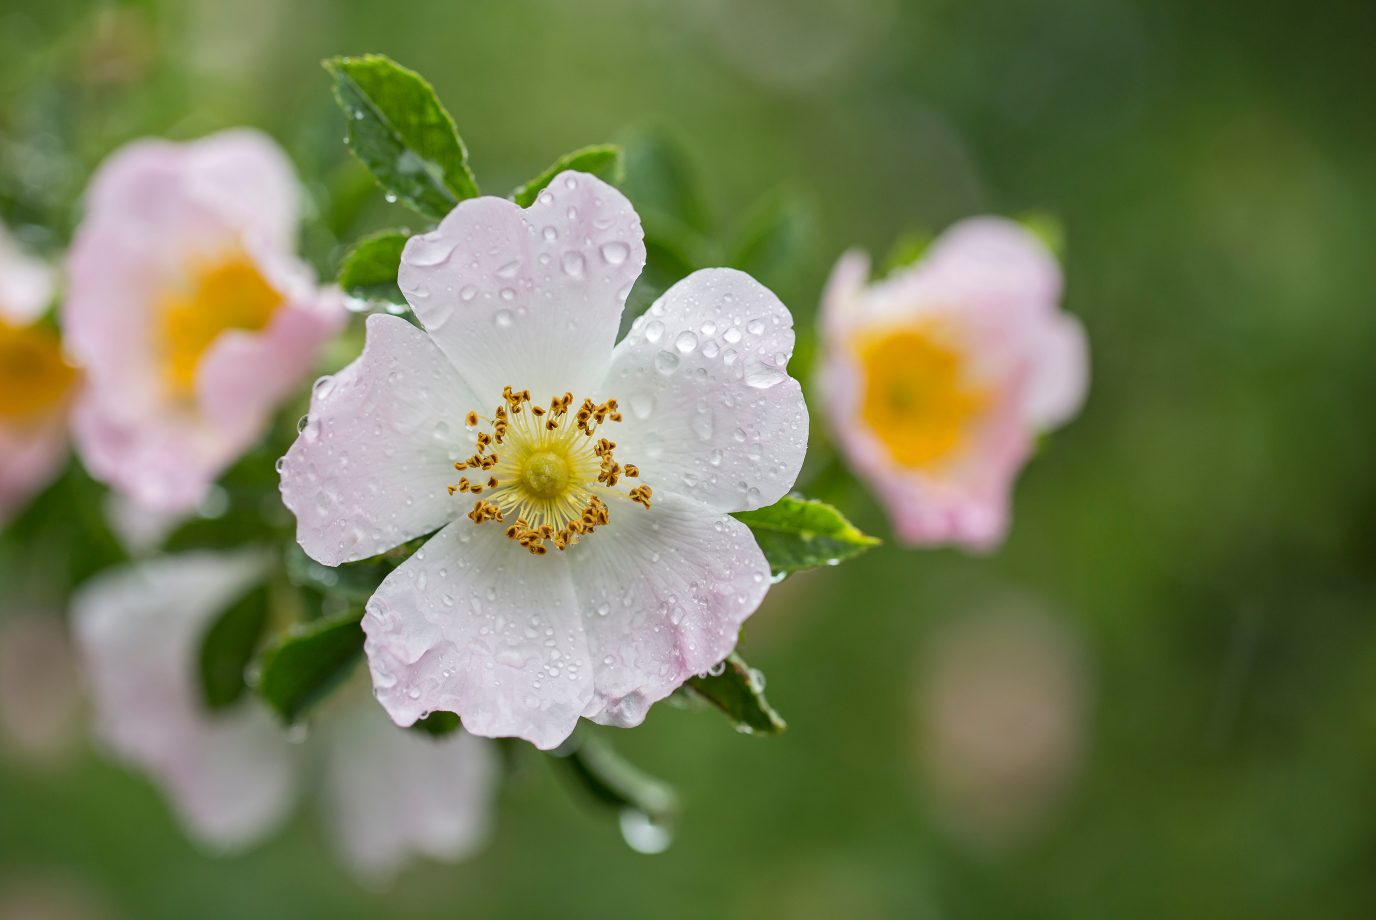 British Wildflower - Beautiful flowers of dog rose (Rosa canina) in morning dew, closeup, selective focus, beautiful blurred background.